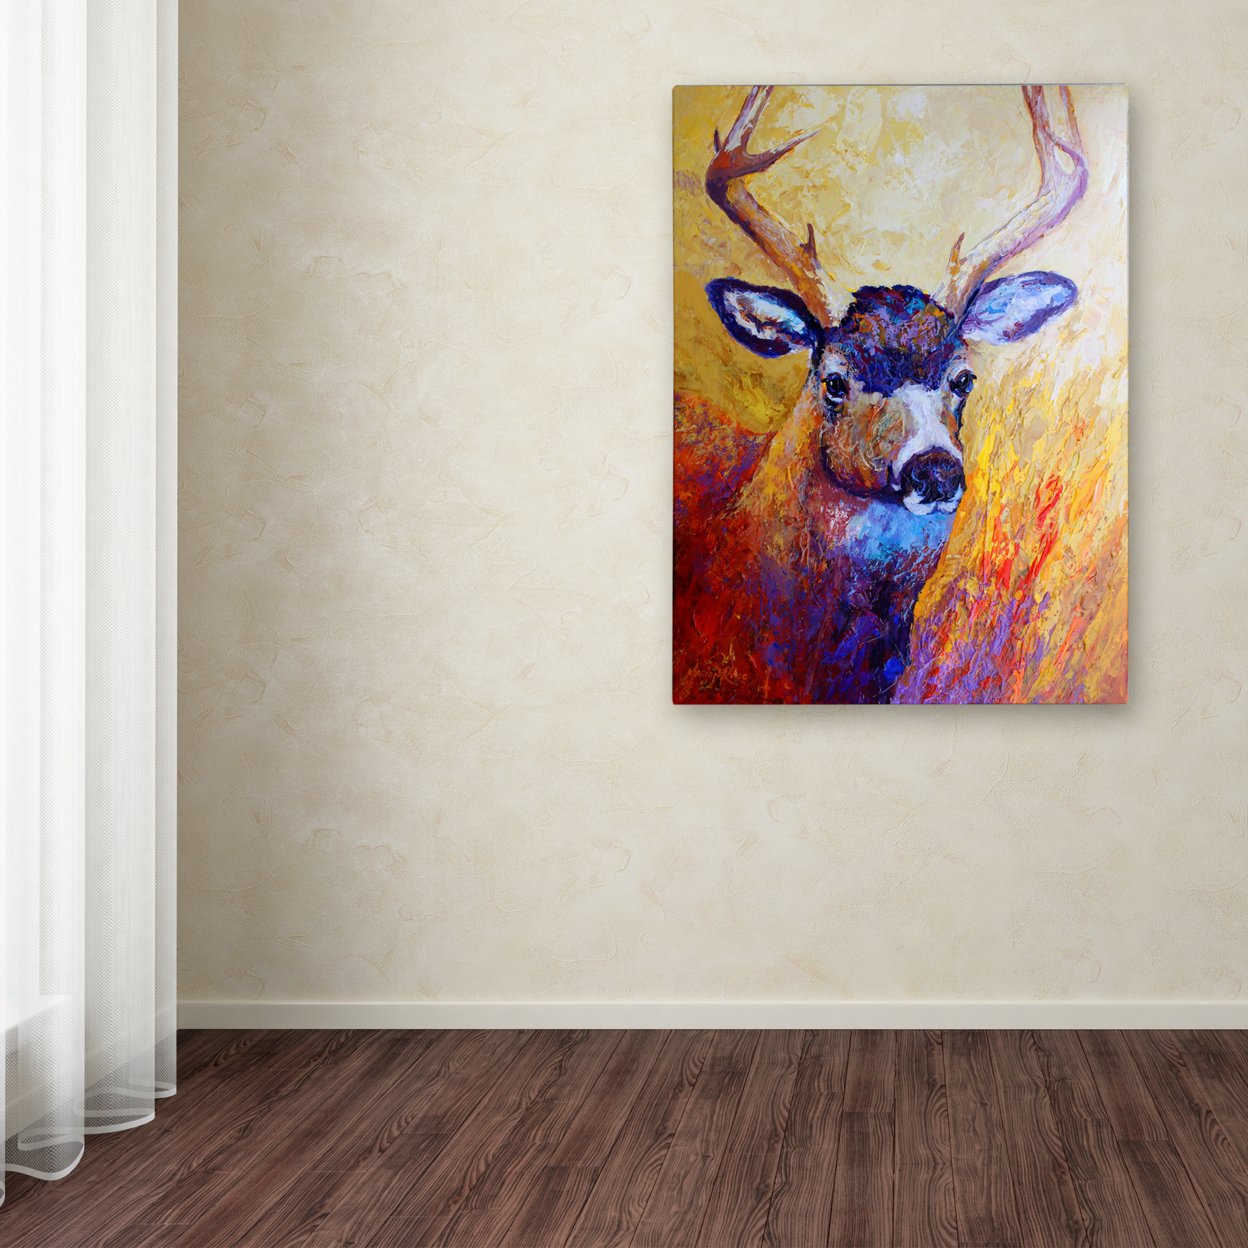 Marion Rose 'Mule Deer Buck' Ready To Hang Canvas Art 18 X 24 Inches Made In USA